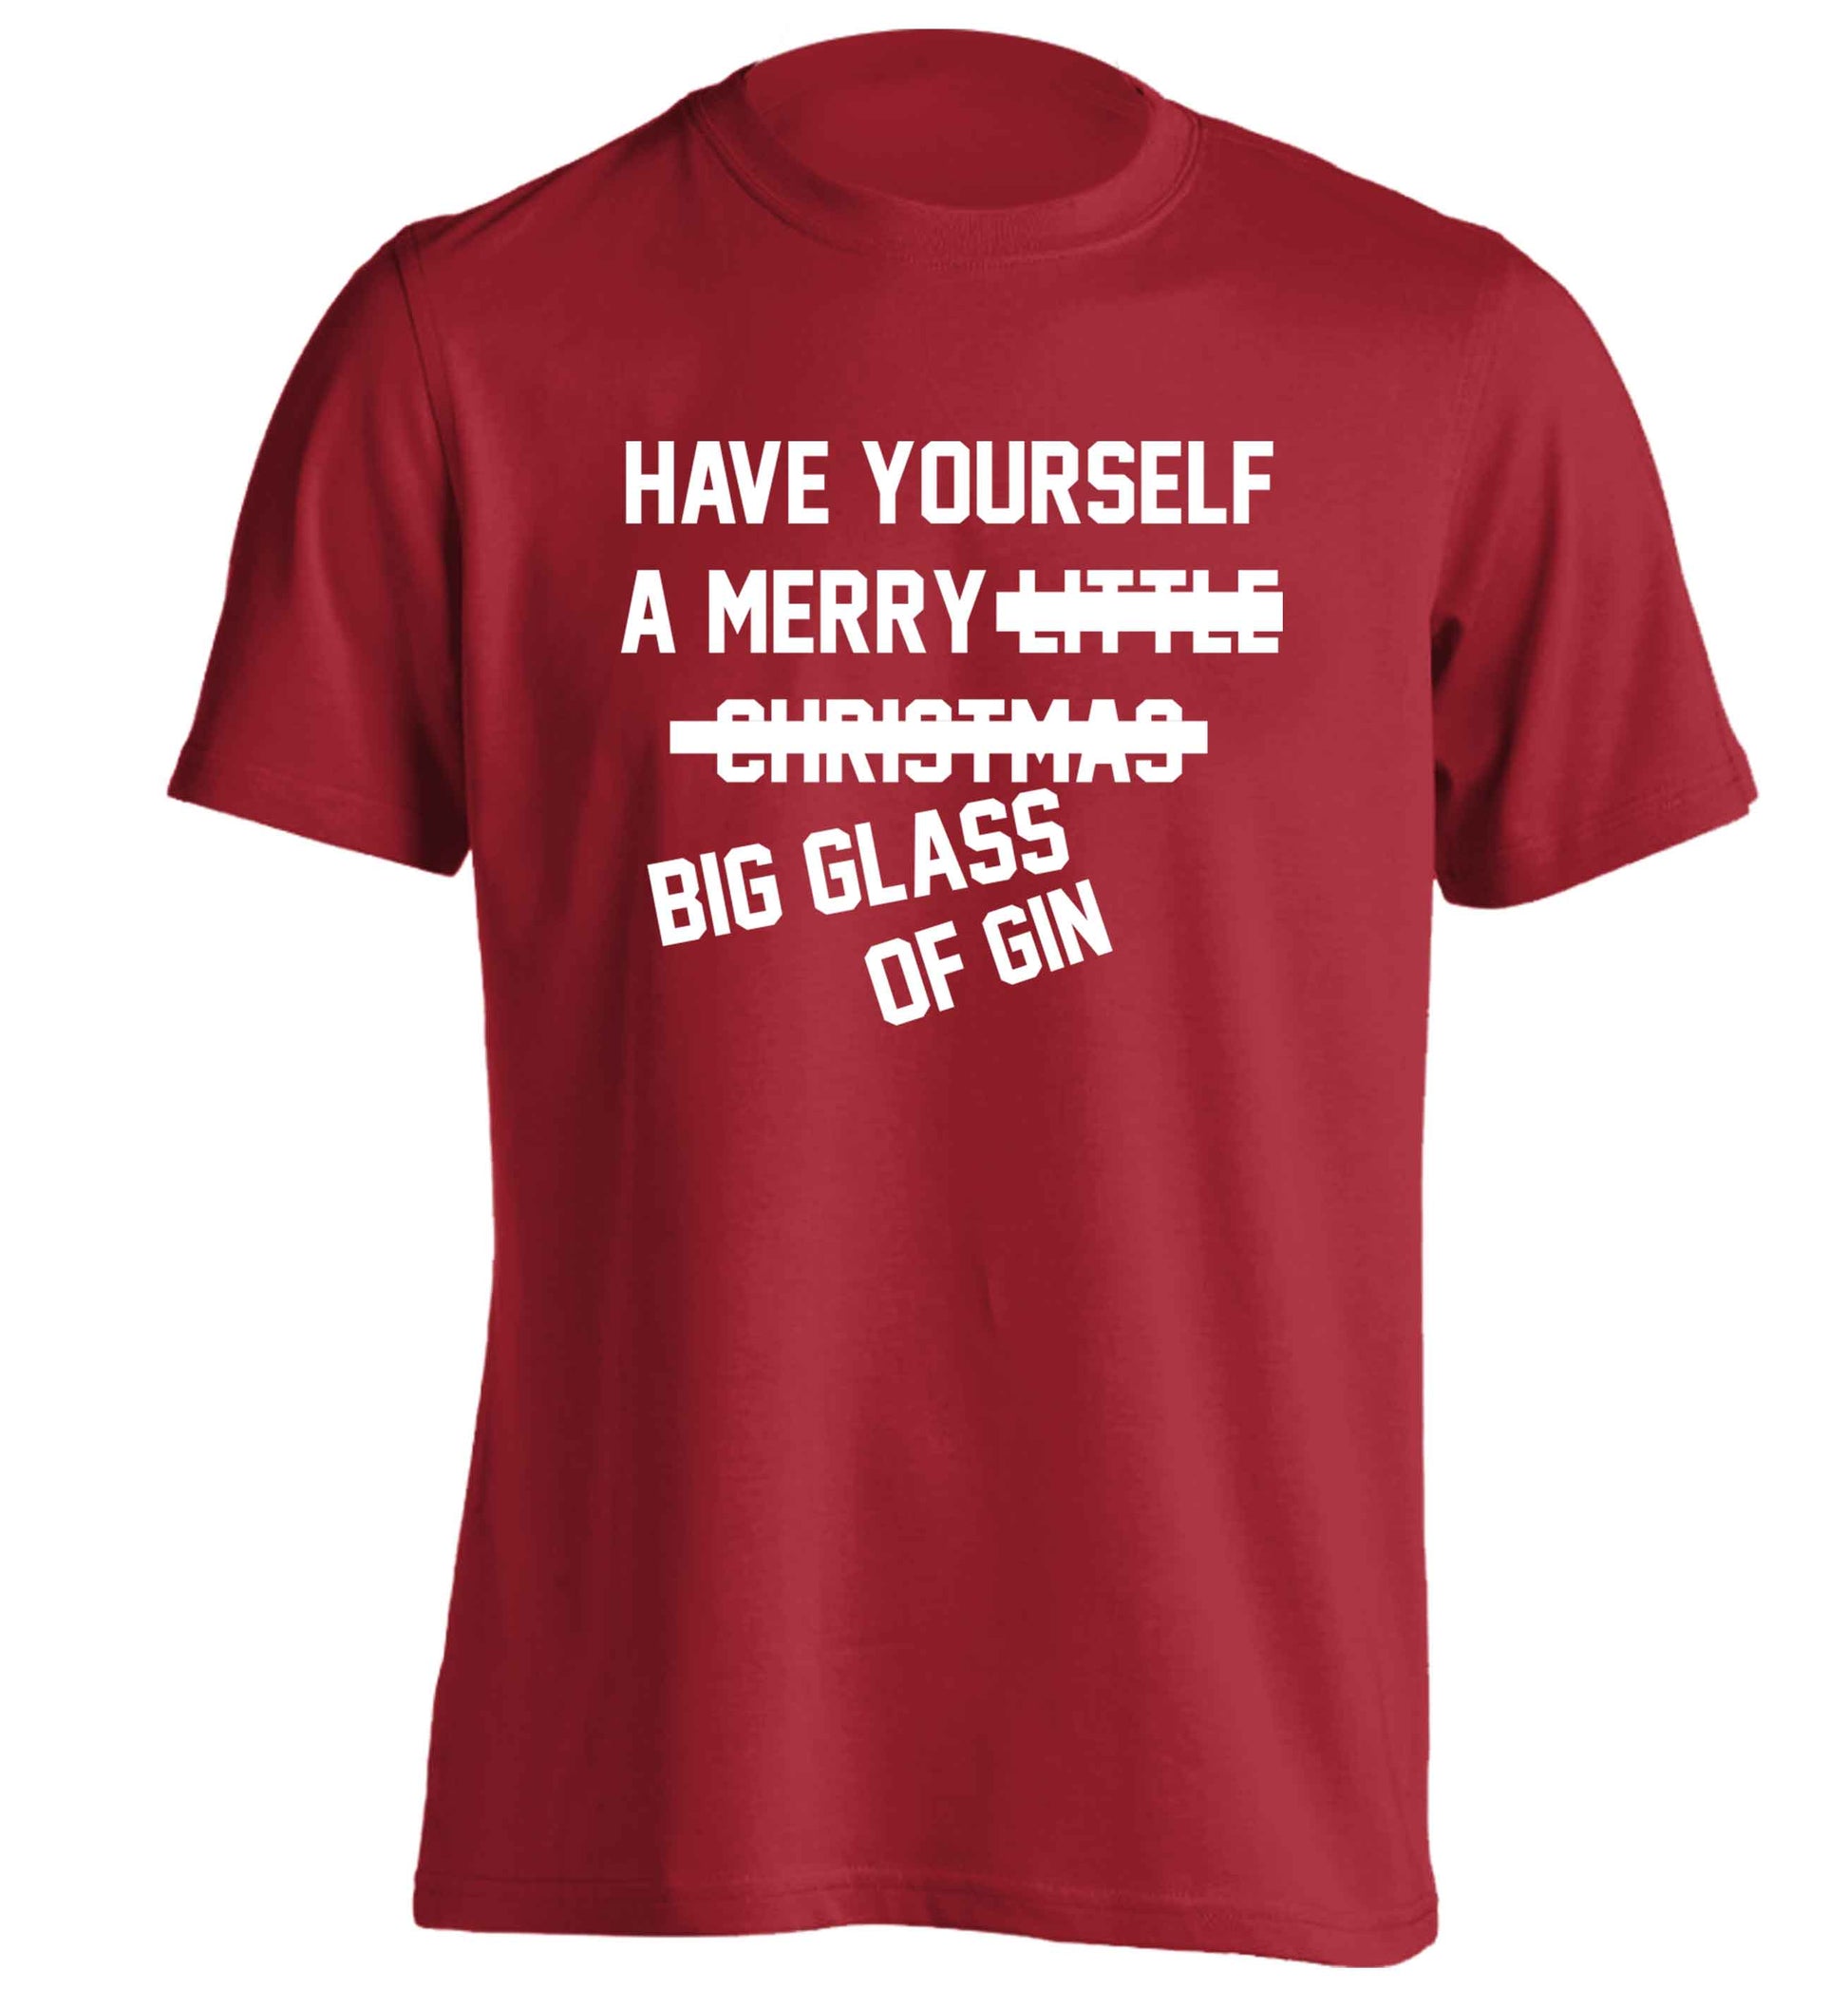 Have yourself a merry big glass of gin adults unisex red Tshirt 2XL